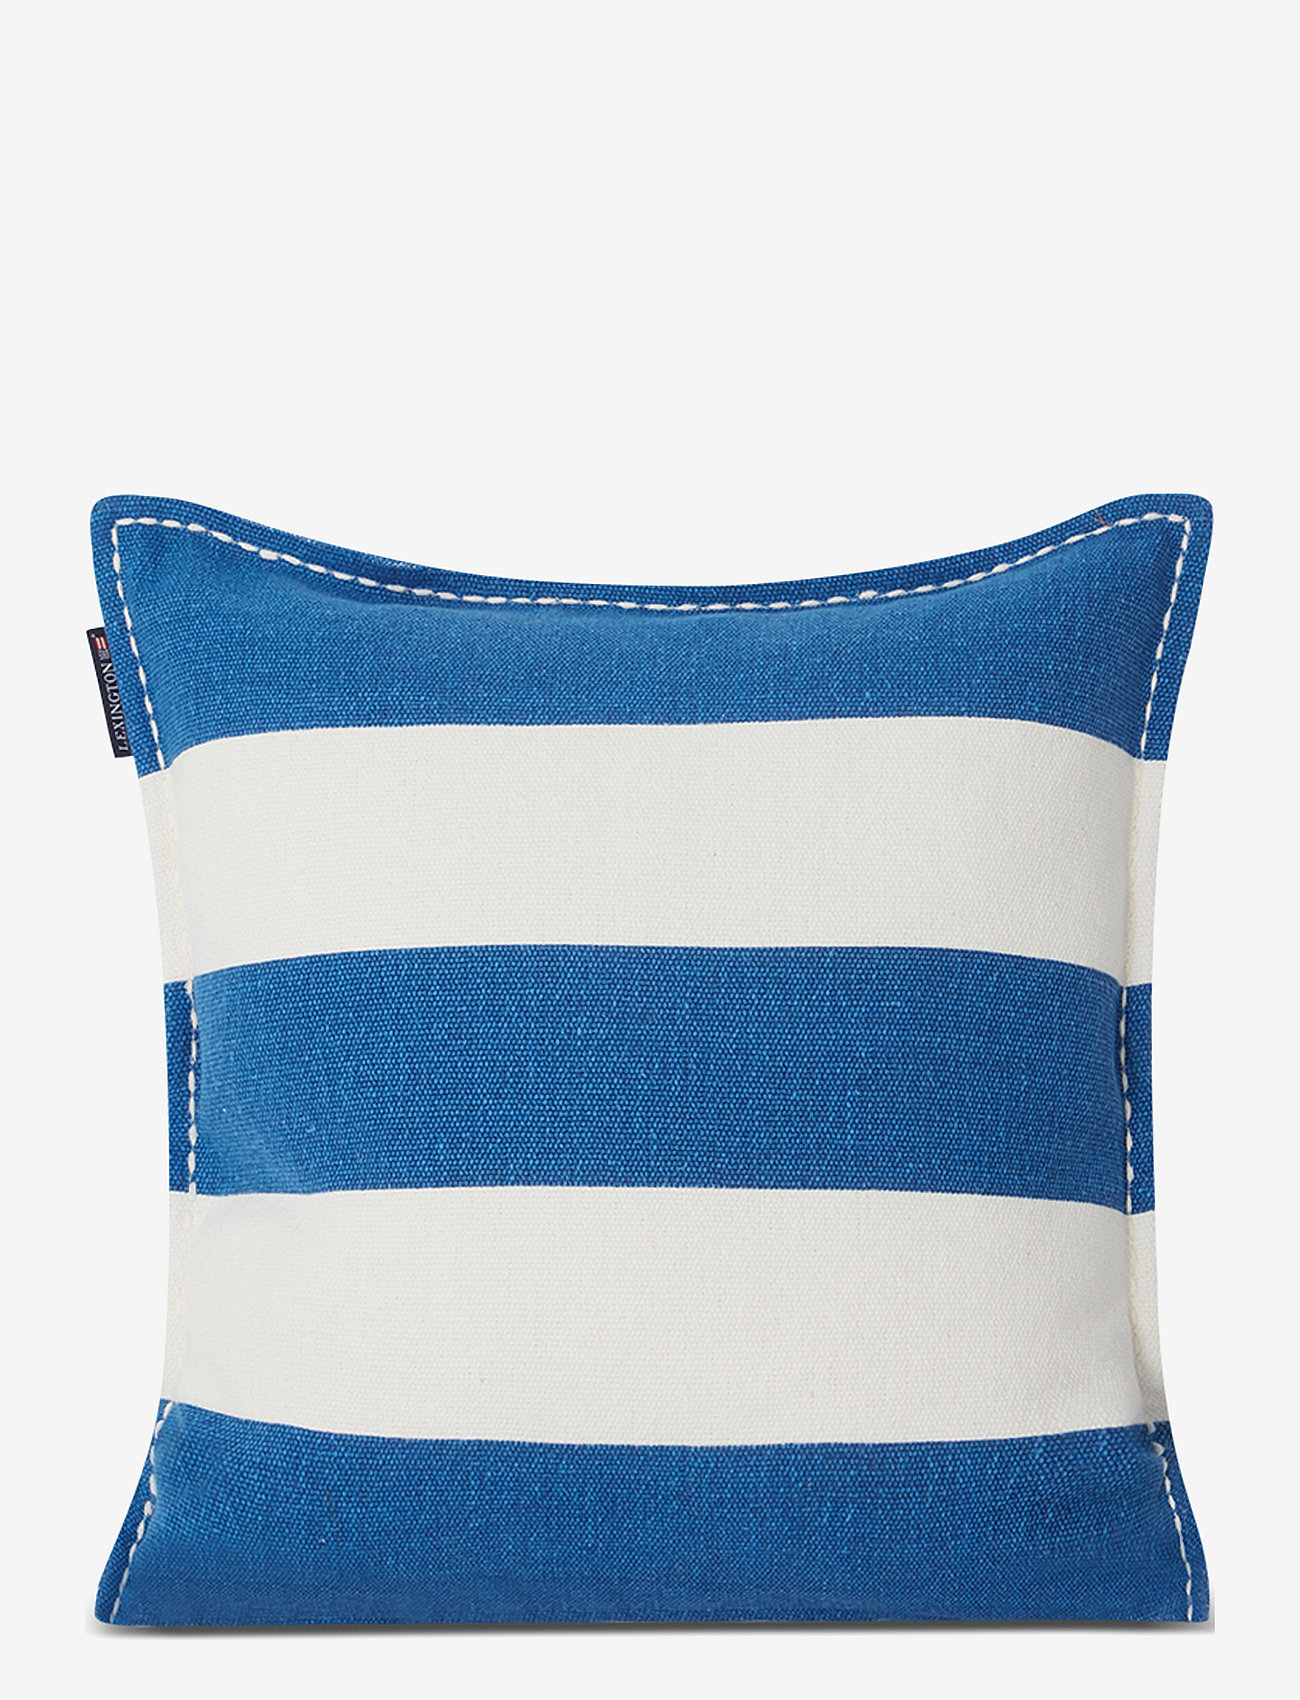 Lexington Home - Block Stripe Printed Recycled Cotton Pillow Cover - cushion covers - blue/white - 1